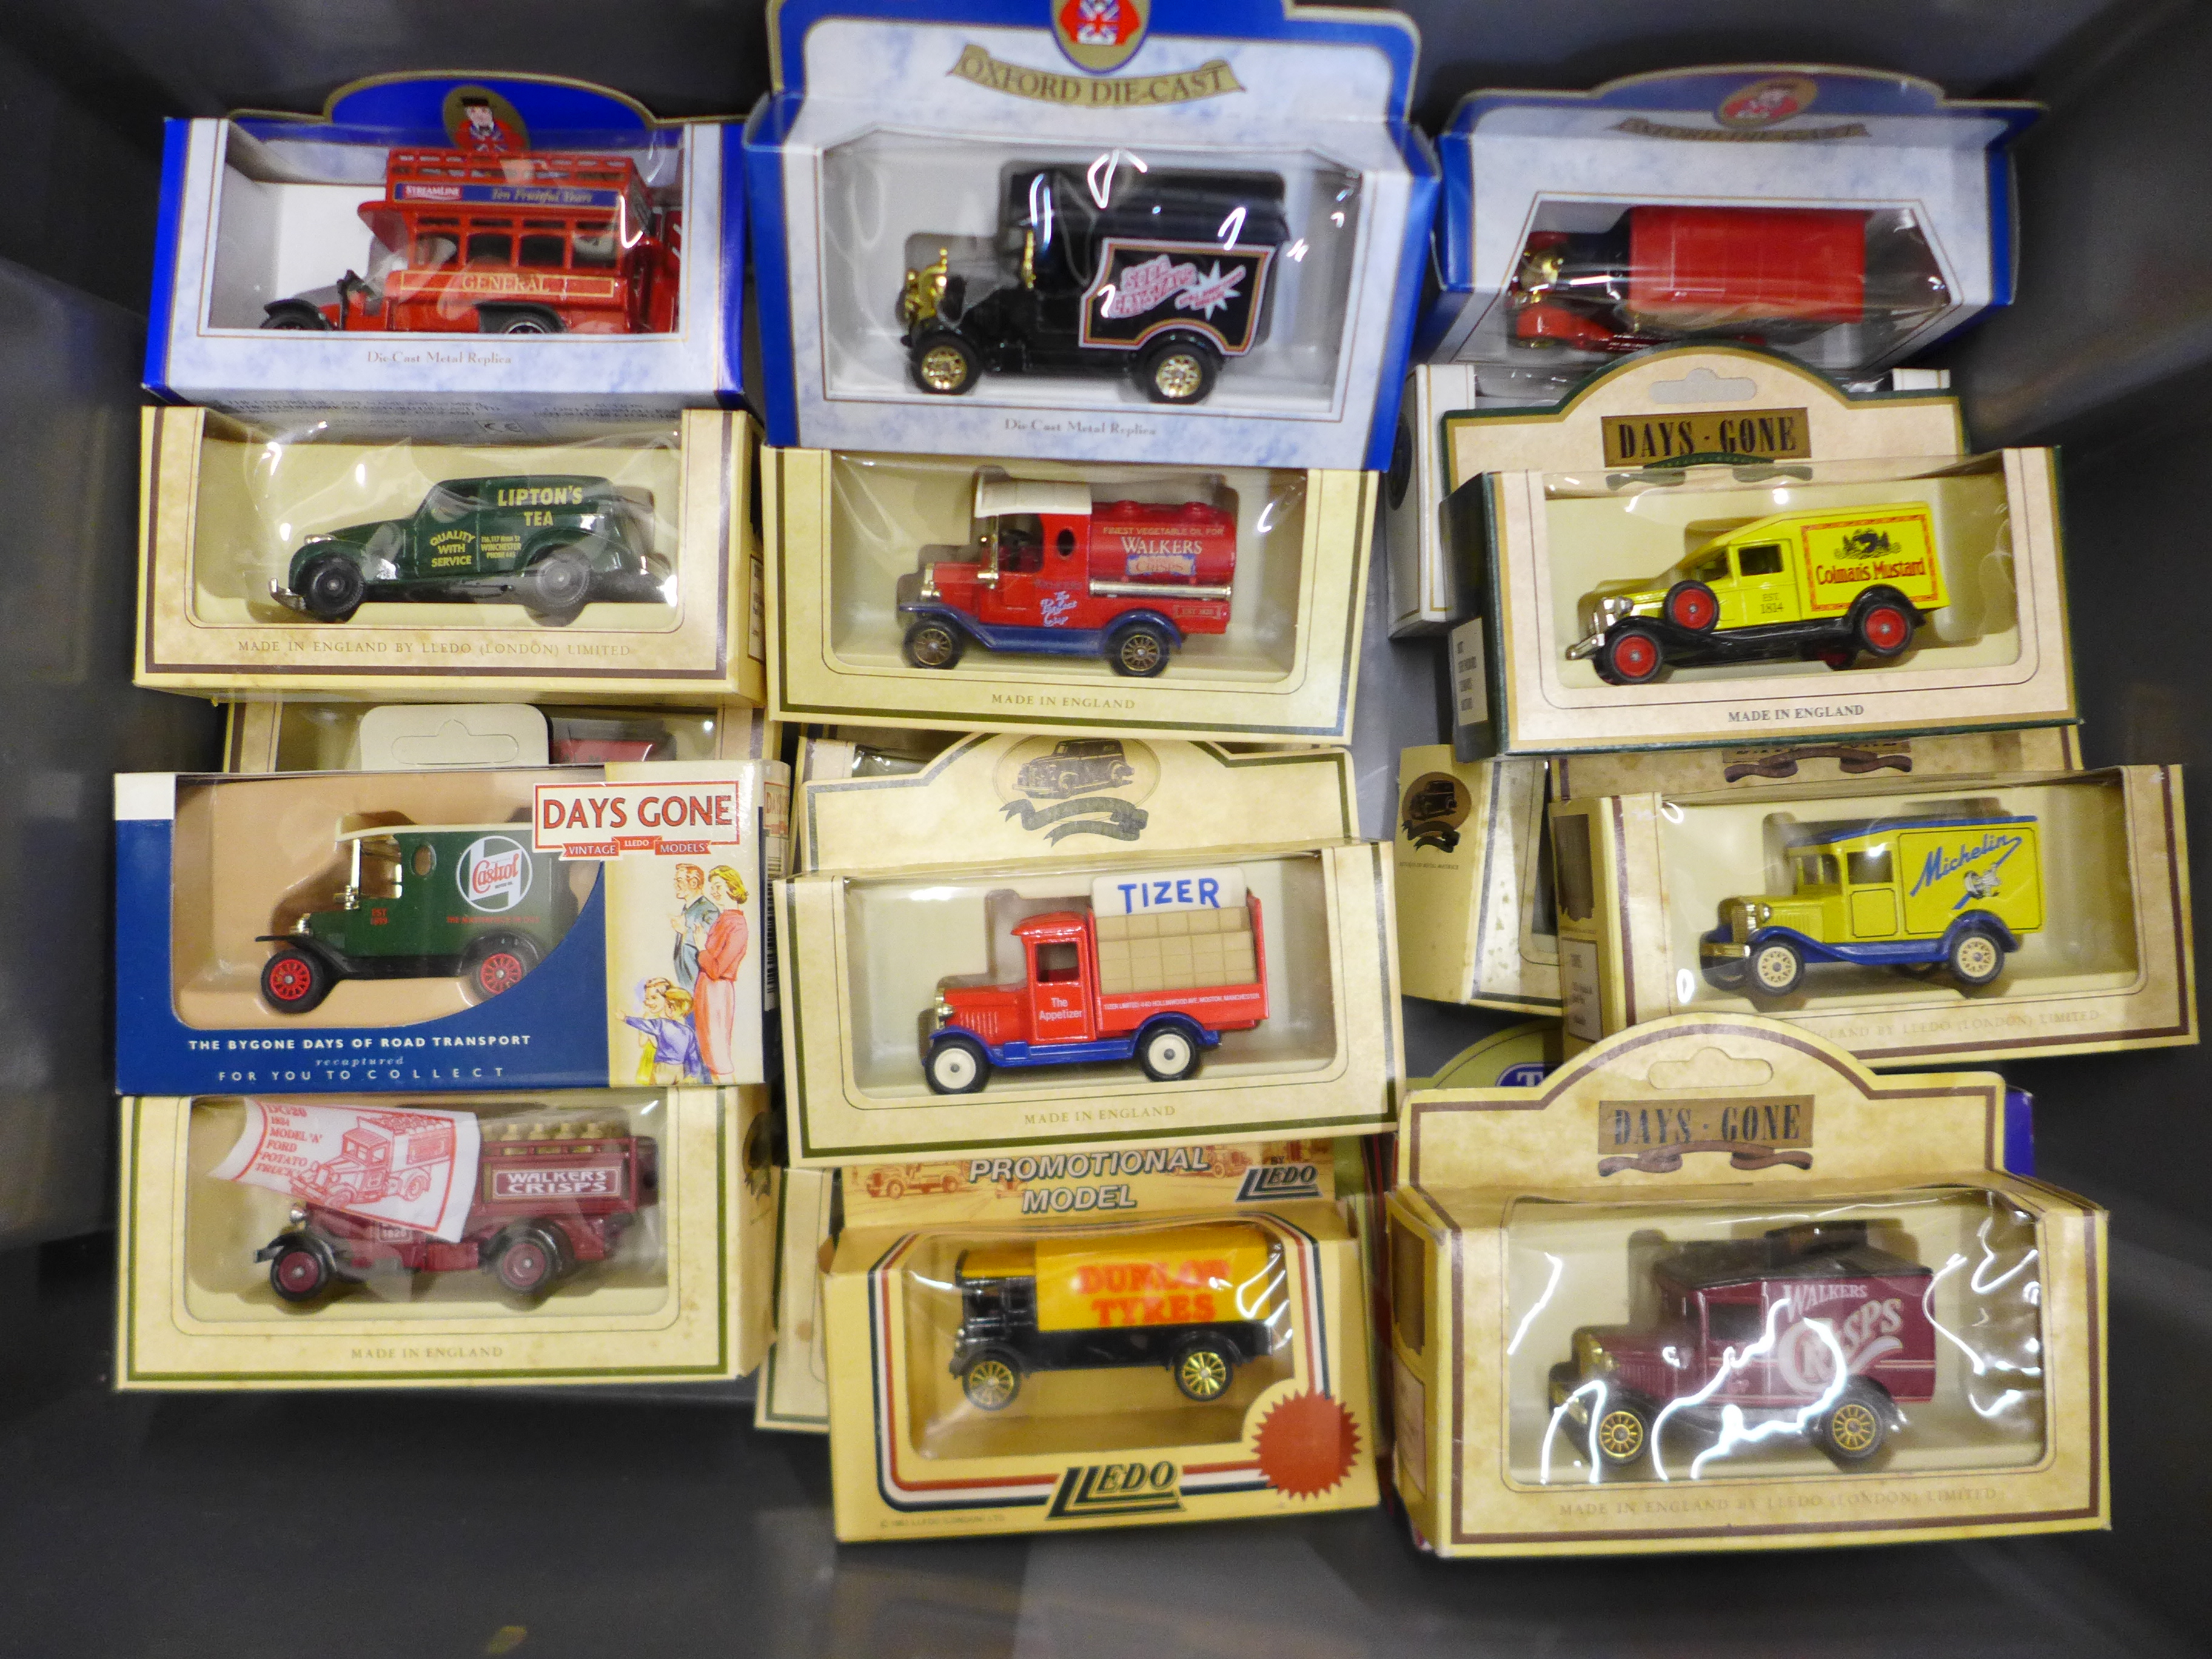 A collection of model vehicles including Days Gone and Oxford